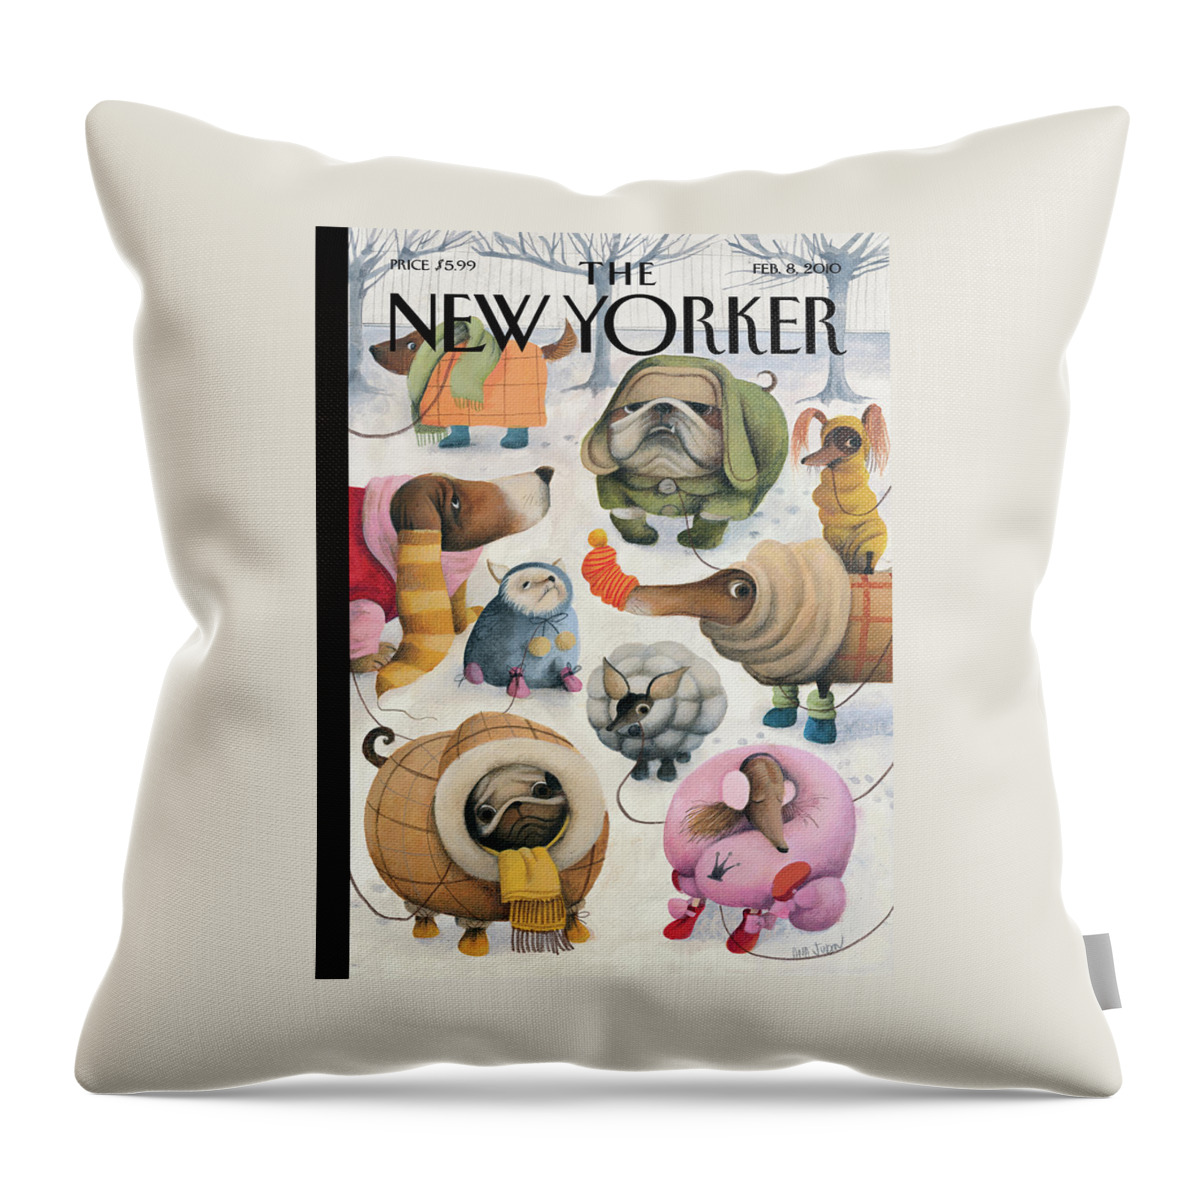 Baby, Its Cold Outside Throw Pillow